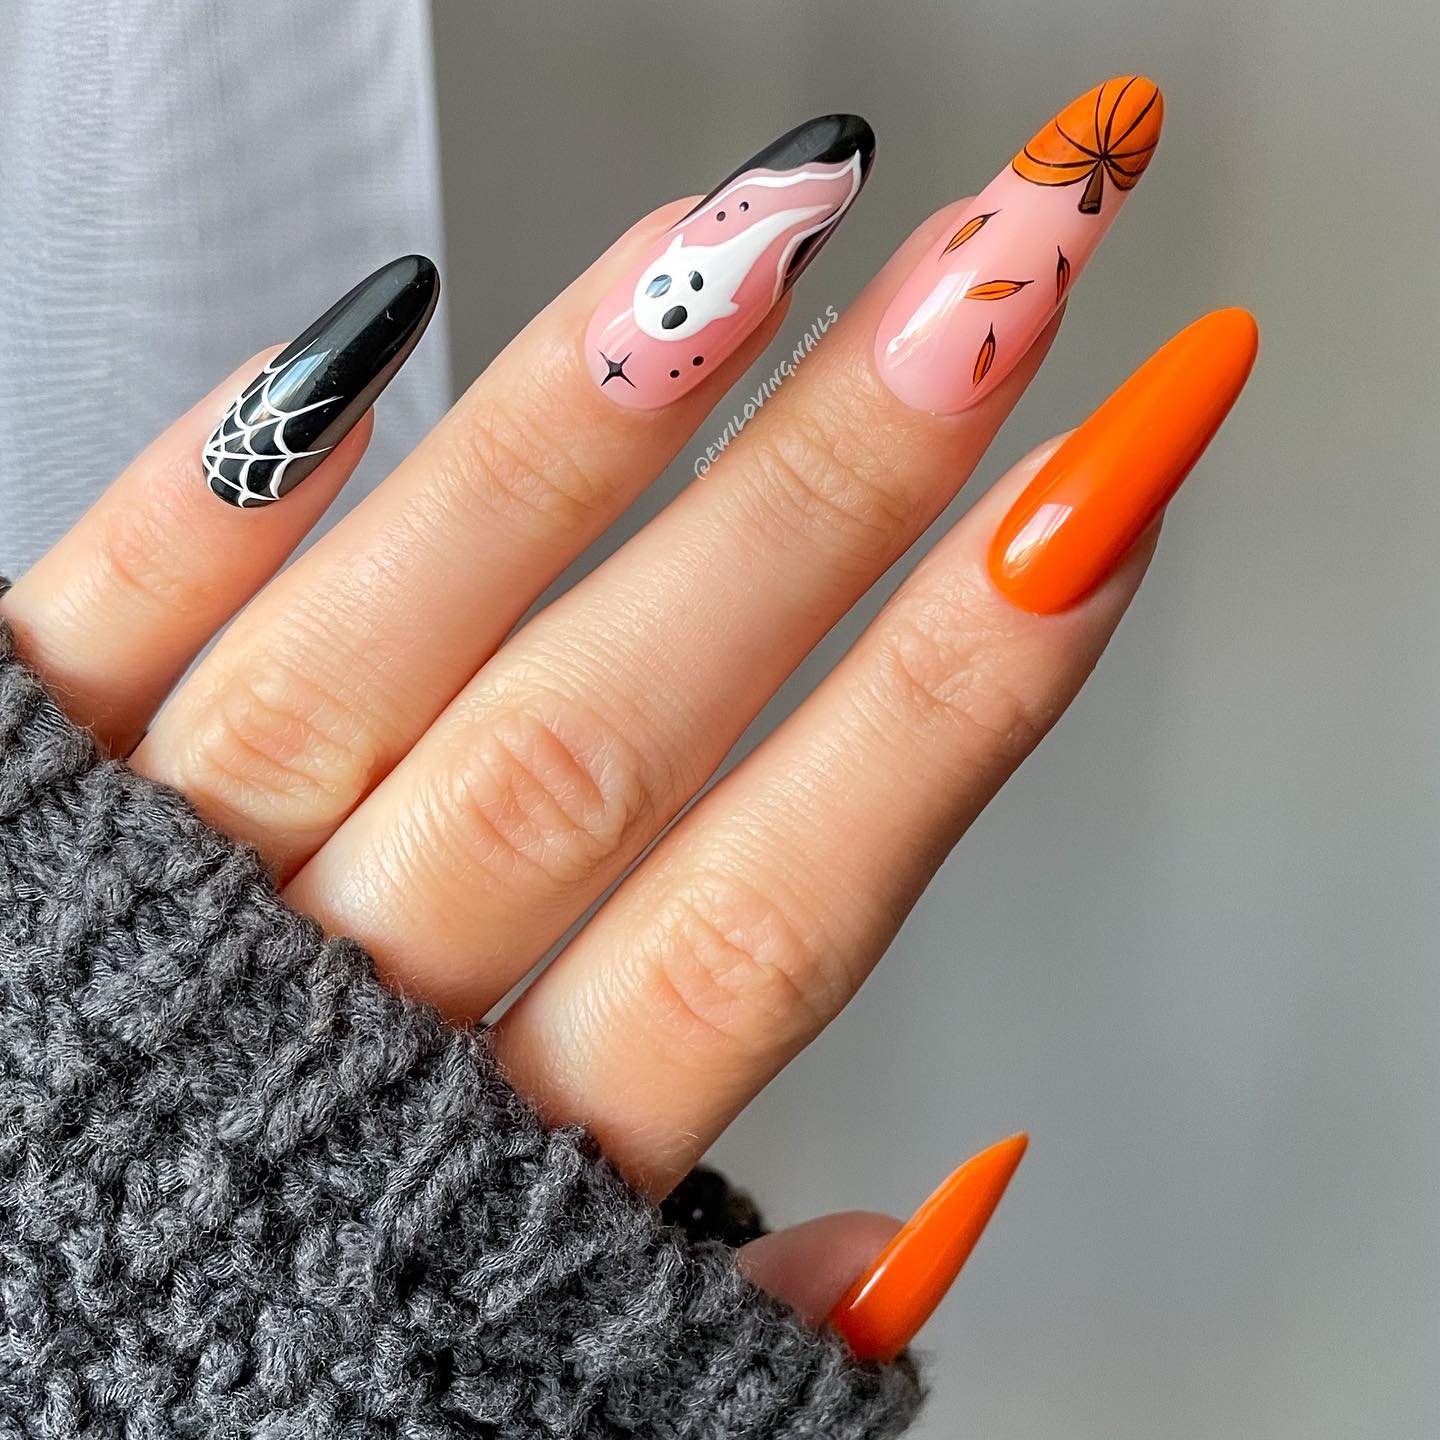 A spider web, a cute ghost and a pumpkin inspired nail art looks great, doesn't it? If you want to be on the stage on Halloween, this is the nail design you should try immediately. With it's perfect lines and shades, no one will take their eyes off you.